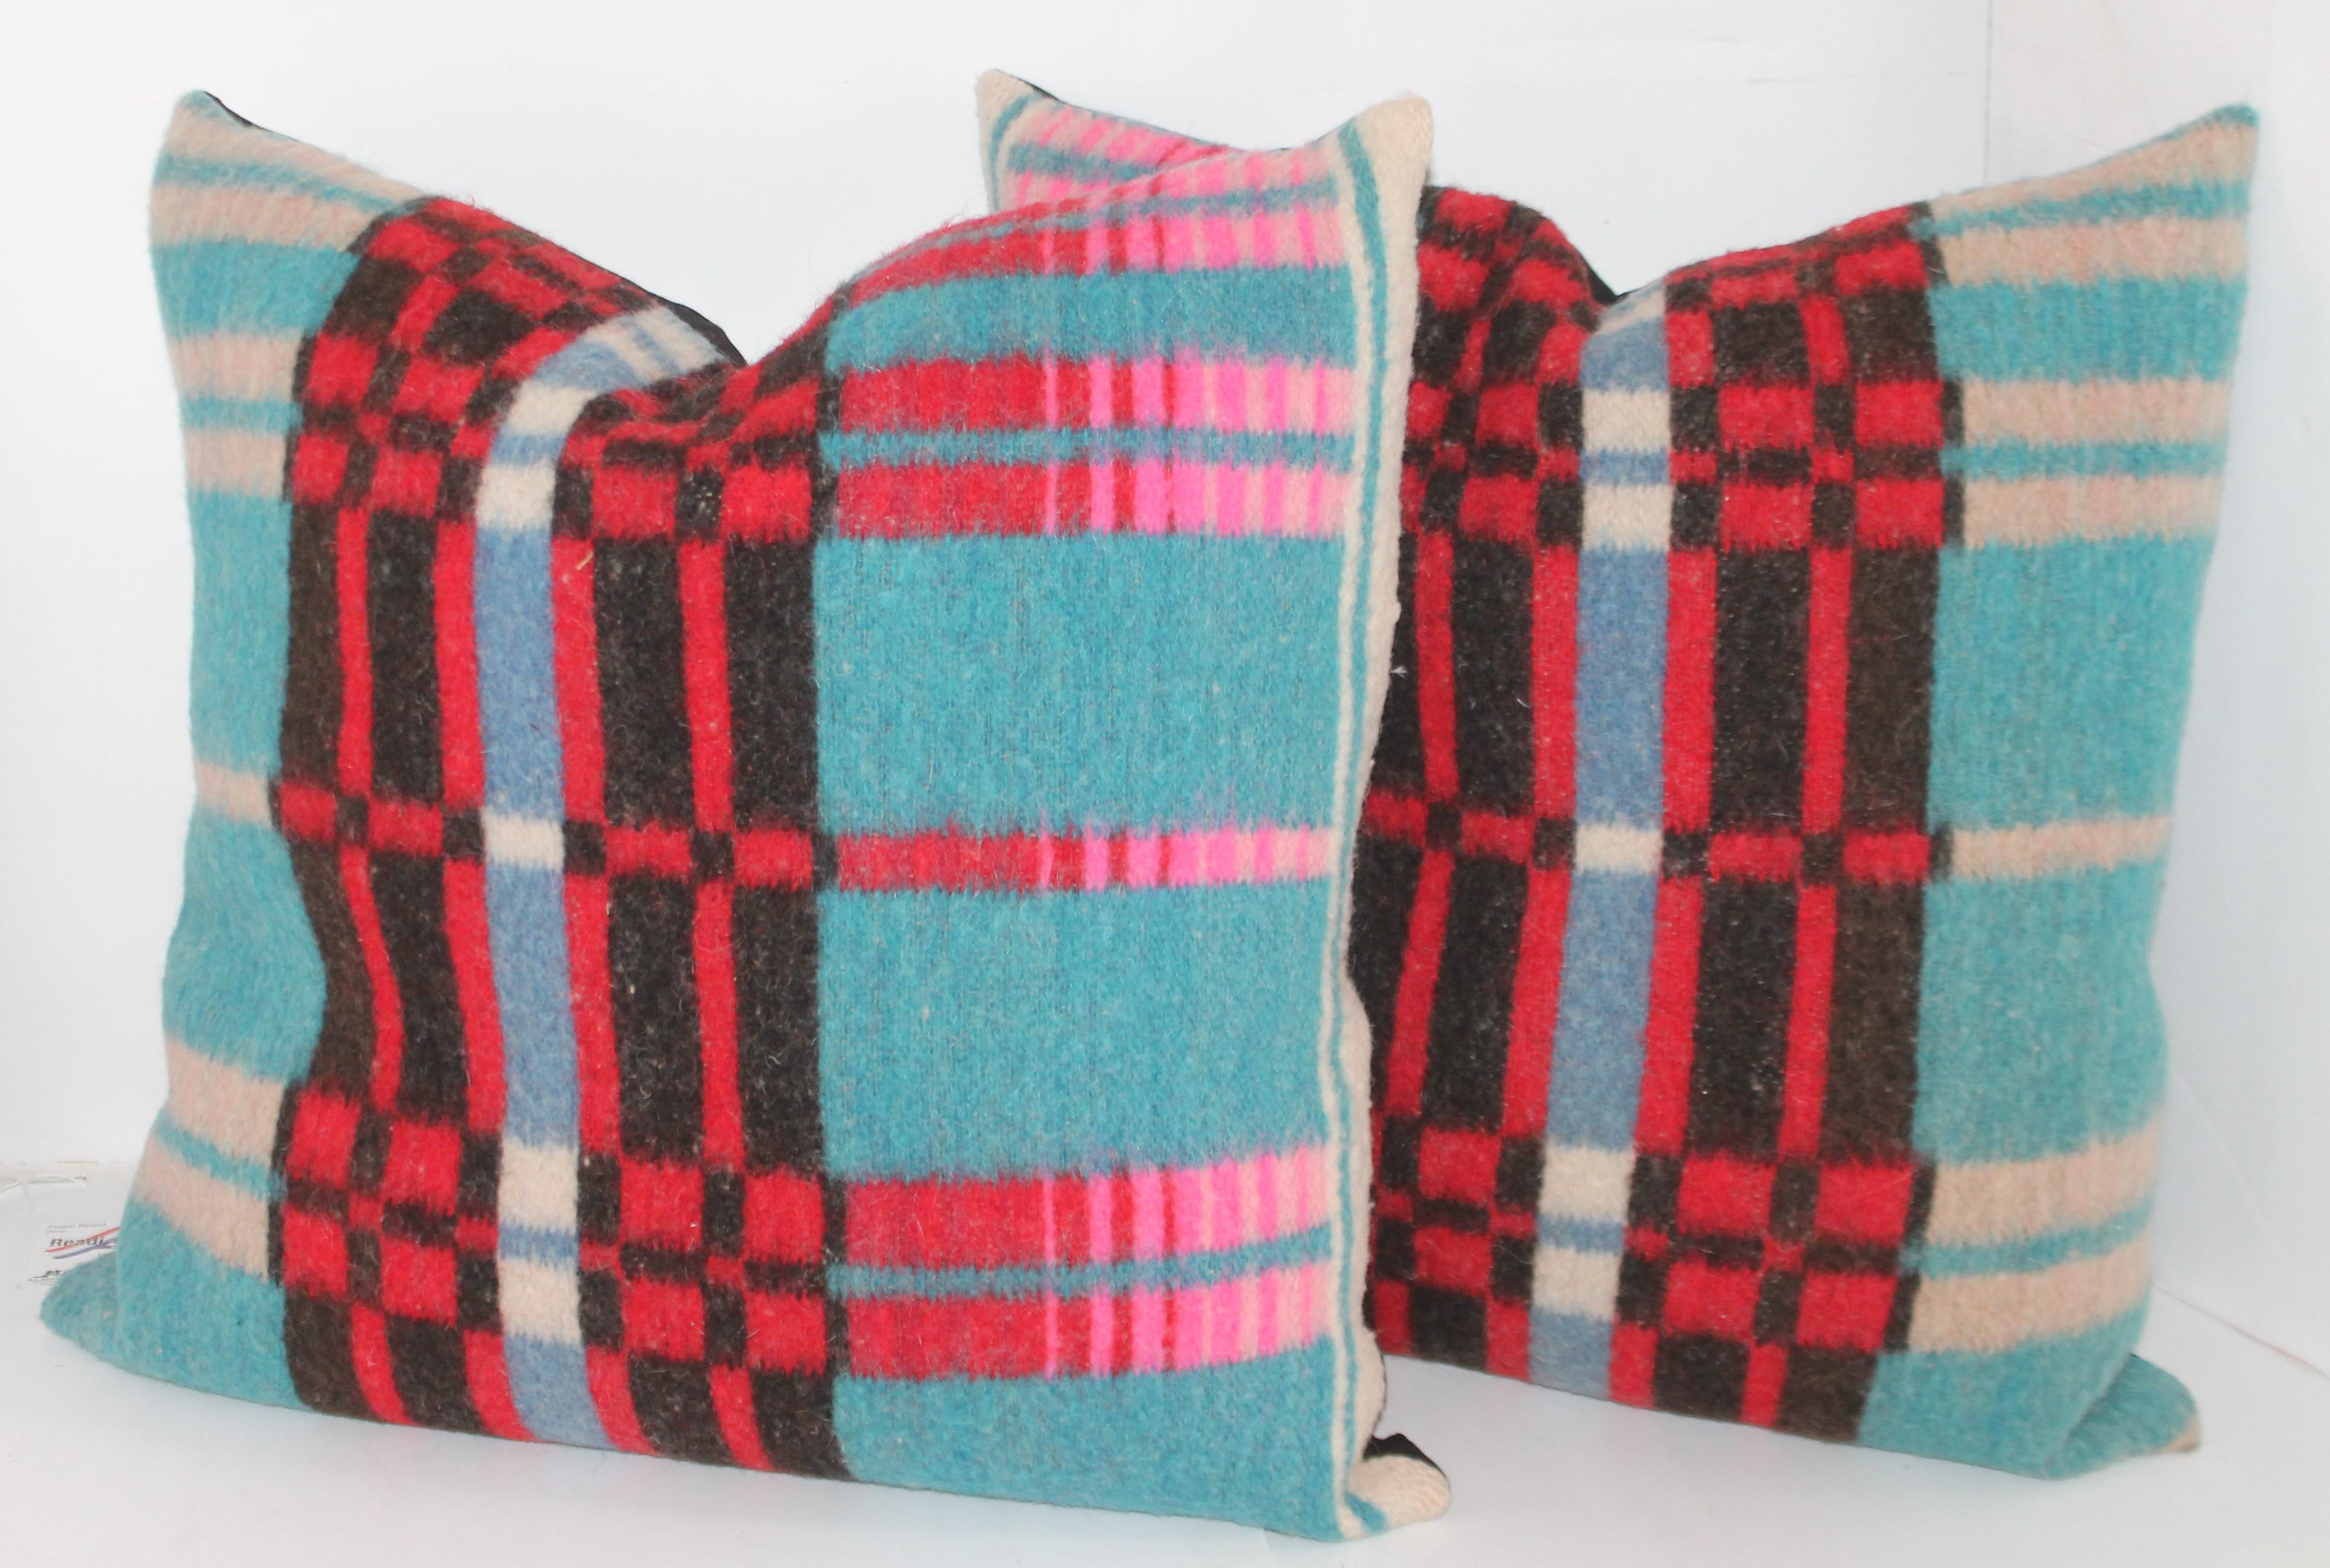 These amazing and early wool horse blanket pillows are in pristine condition and sold as a group of four. The backings are cotton linen.